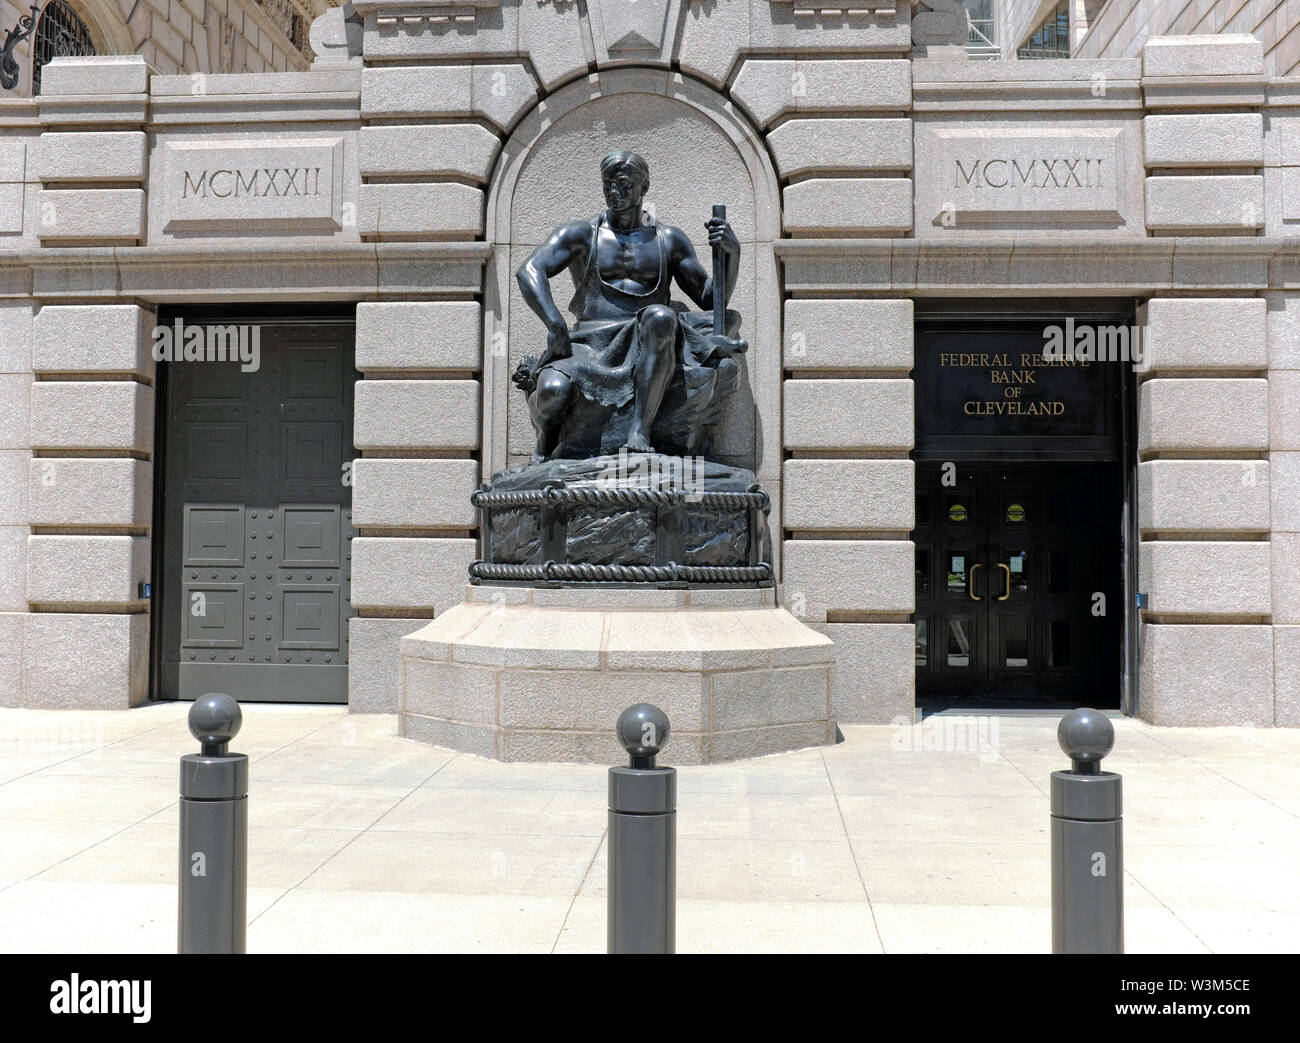 The Cleveland Federal Reserve entance on Superior Ave. is guarded by the 'Energy in Repose' statue by Henry Hering in Cleveland, Ohio, USA. Stock Photo